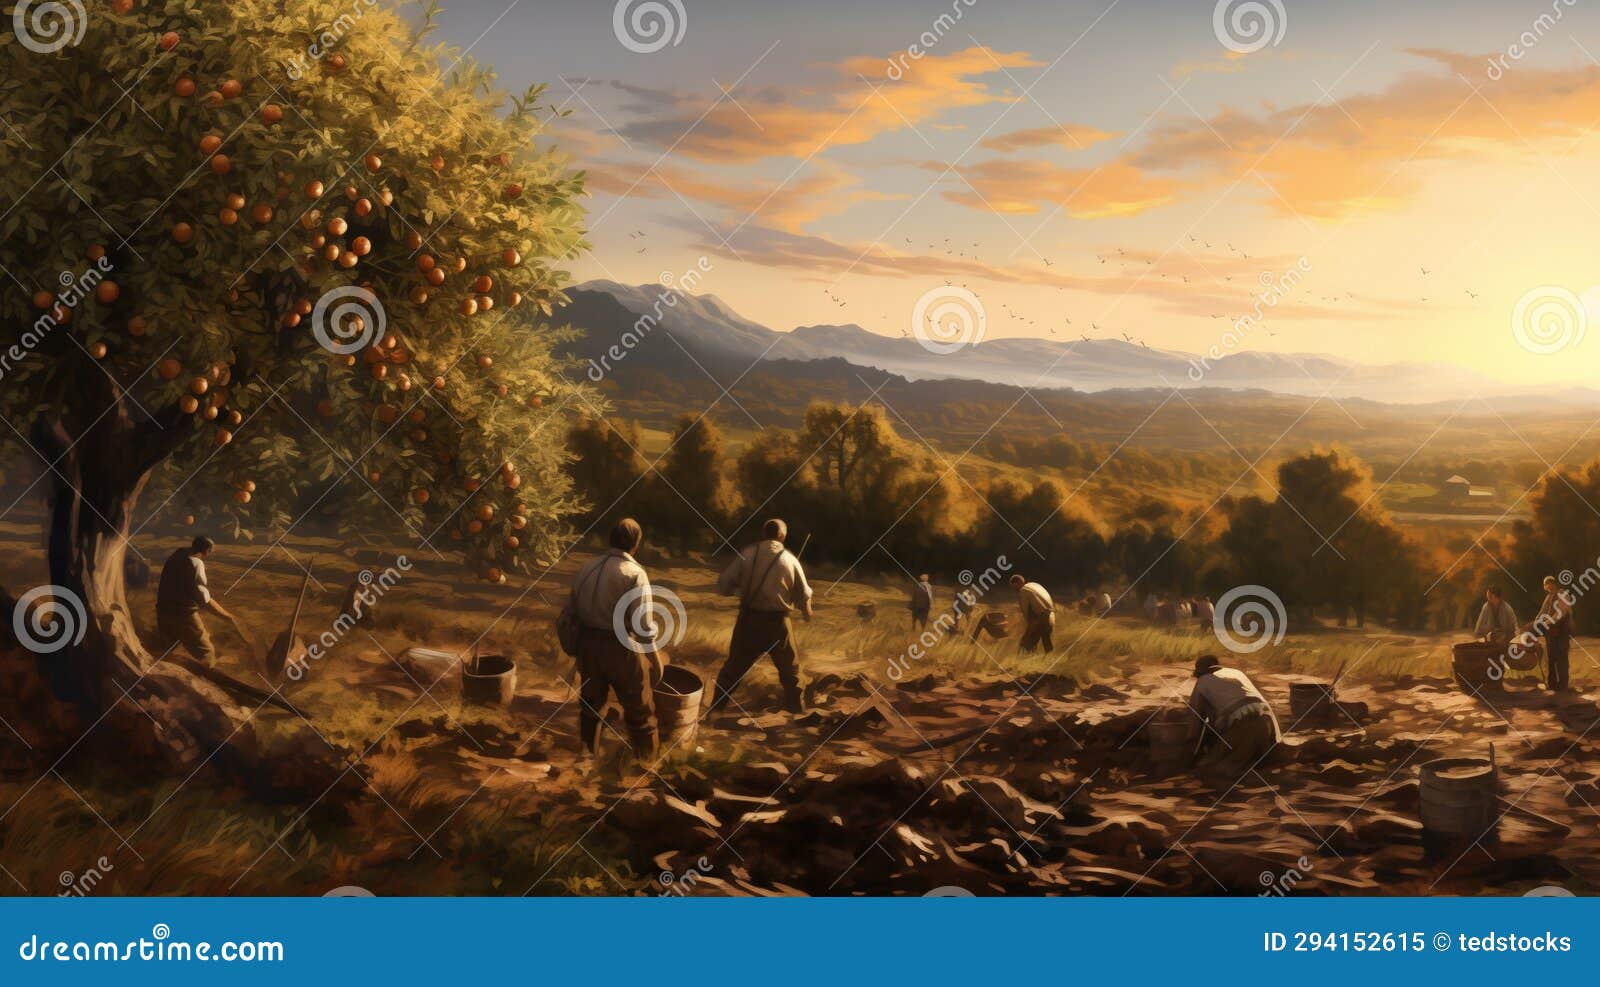 oil painting of a plentiful orchard with farmers picking the fruit of their labor, ai generated